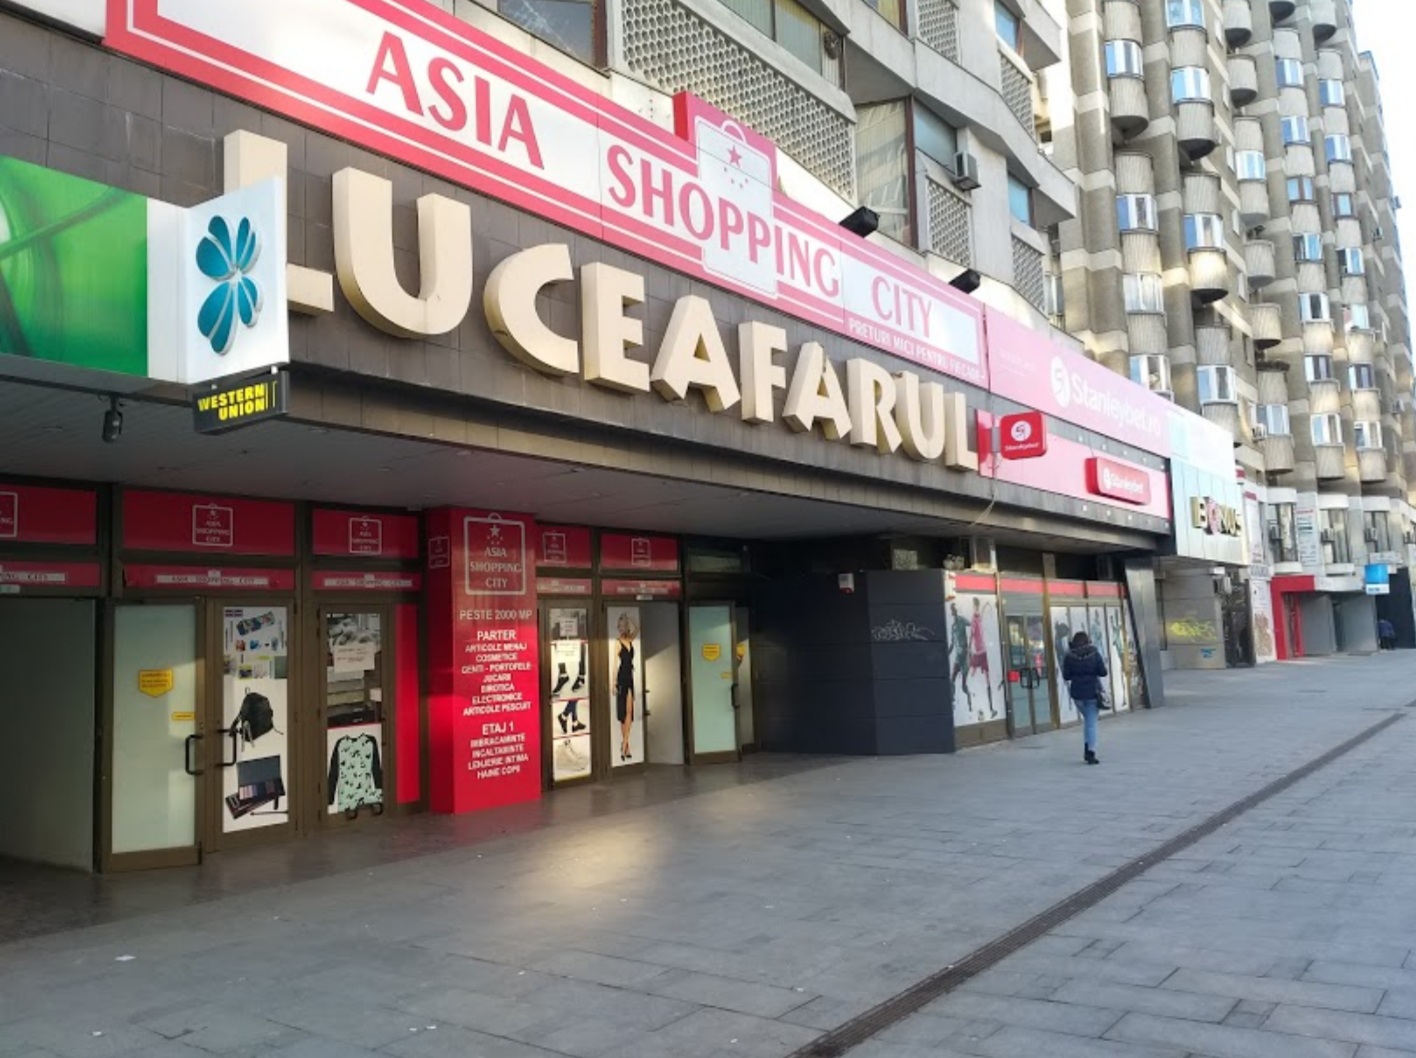 ASIA SHOPING CITY